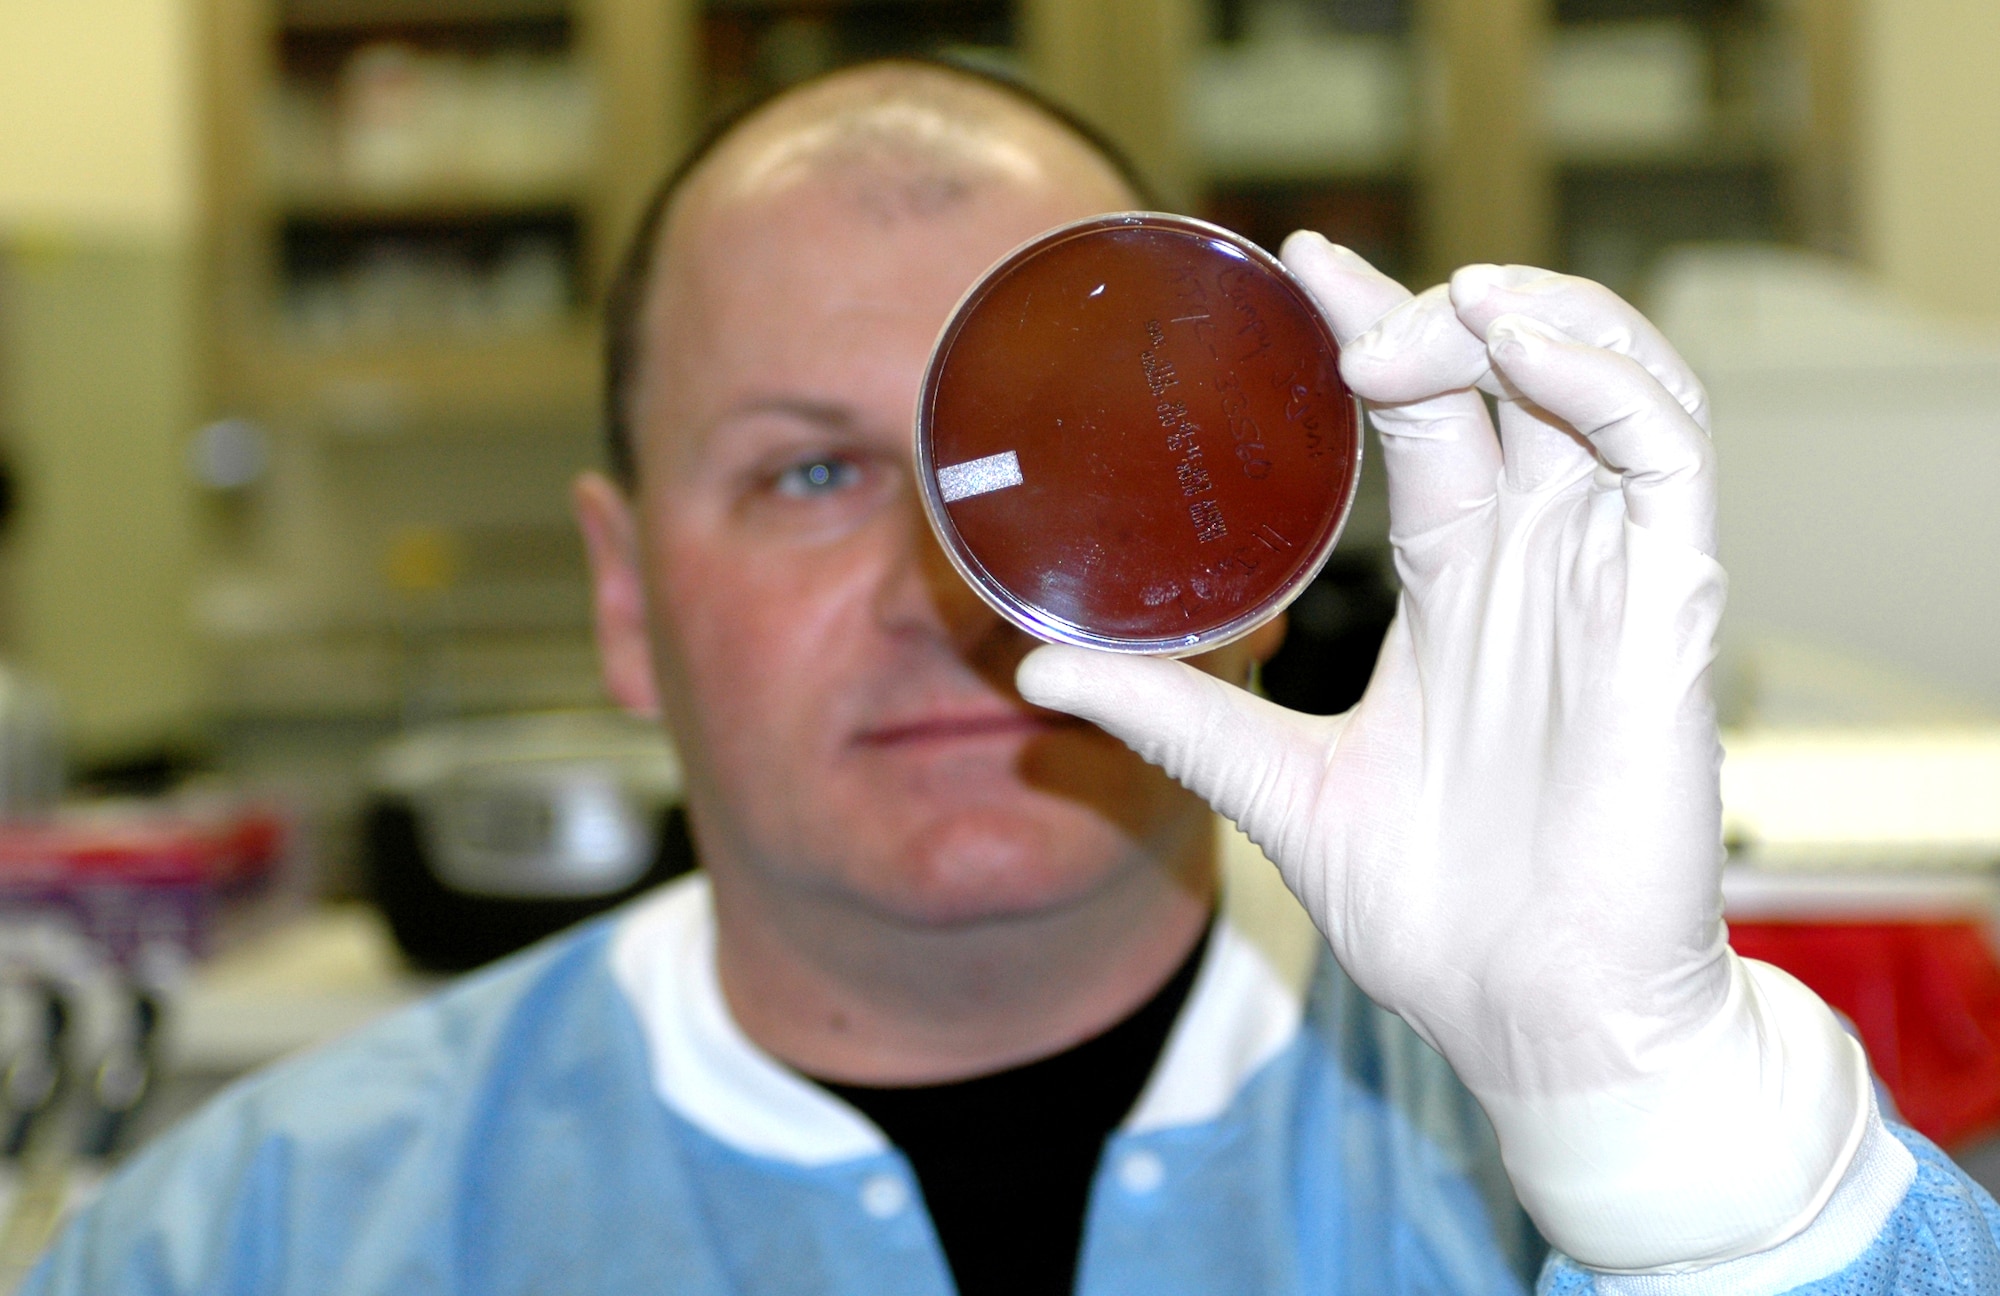 Maj. Anthony Caruso, 60th Medical Support Squadron, examines a growth of campylobacter bacteria, usually transmitted in contaminated food or water, and one of the most common causes of bacterial foodborne illness in the United States. The Clinical Investigation Facility at David Grant USAF Medical Center specializes in the quick detection of food-born pathogens using DNA research. Currently detecting viruses or bacteria in food is a process that can take from 24 to 96 hours. (U.S. Air Force photo by Jennifer Brugman)